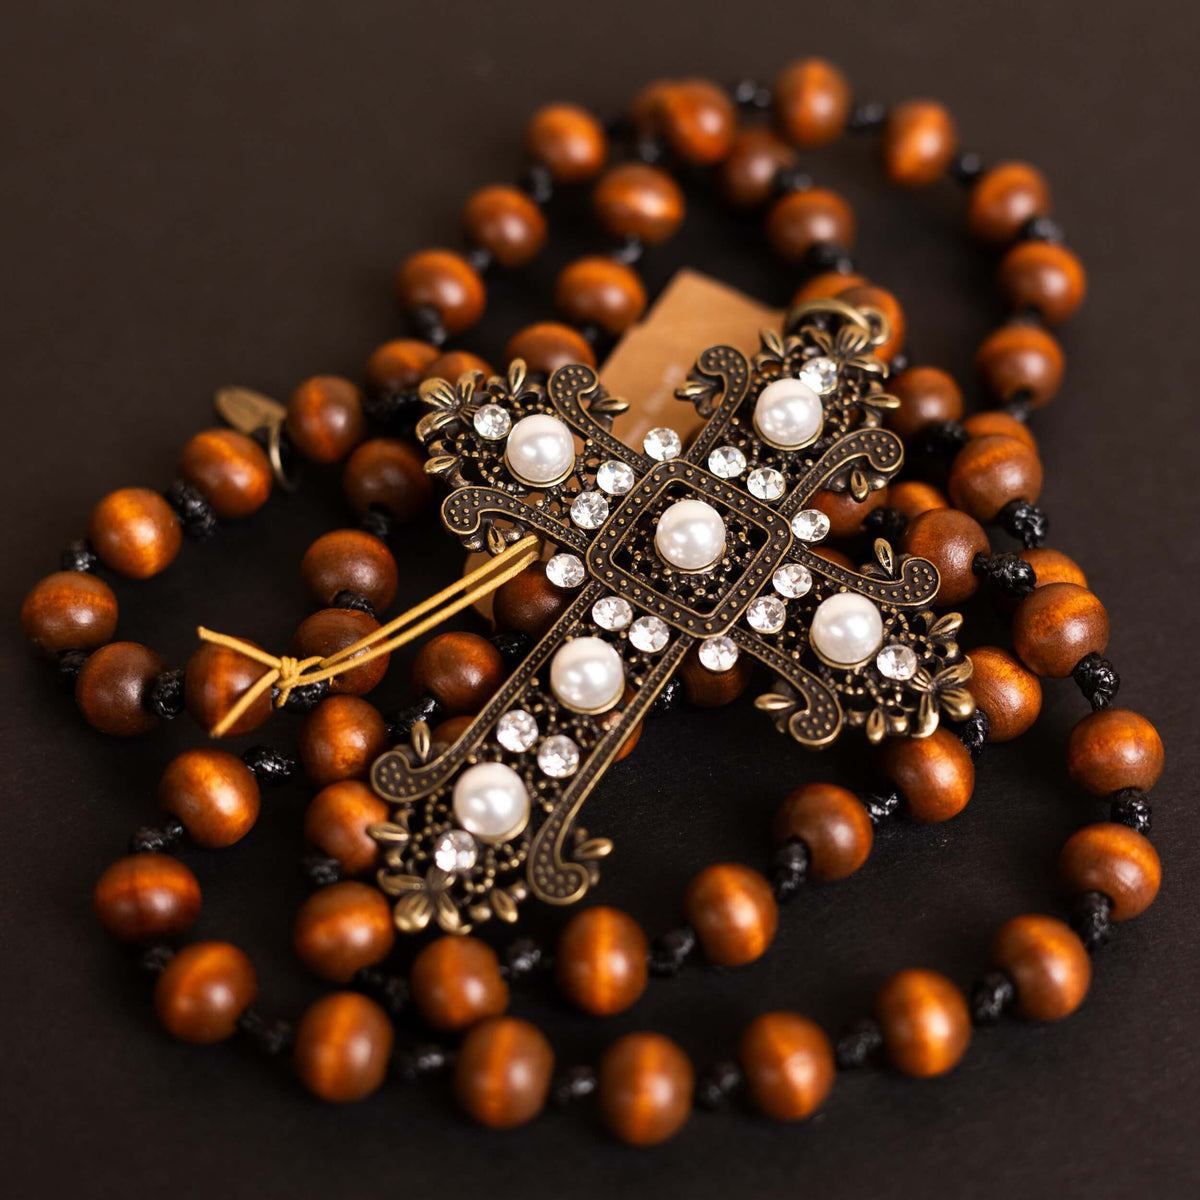 Gold Pearl & Crystal Gothic Cross on Wooden Bead Necklace